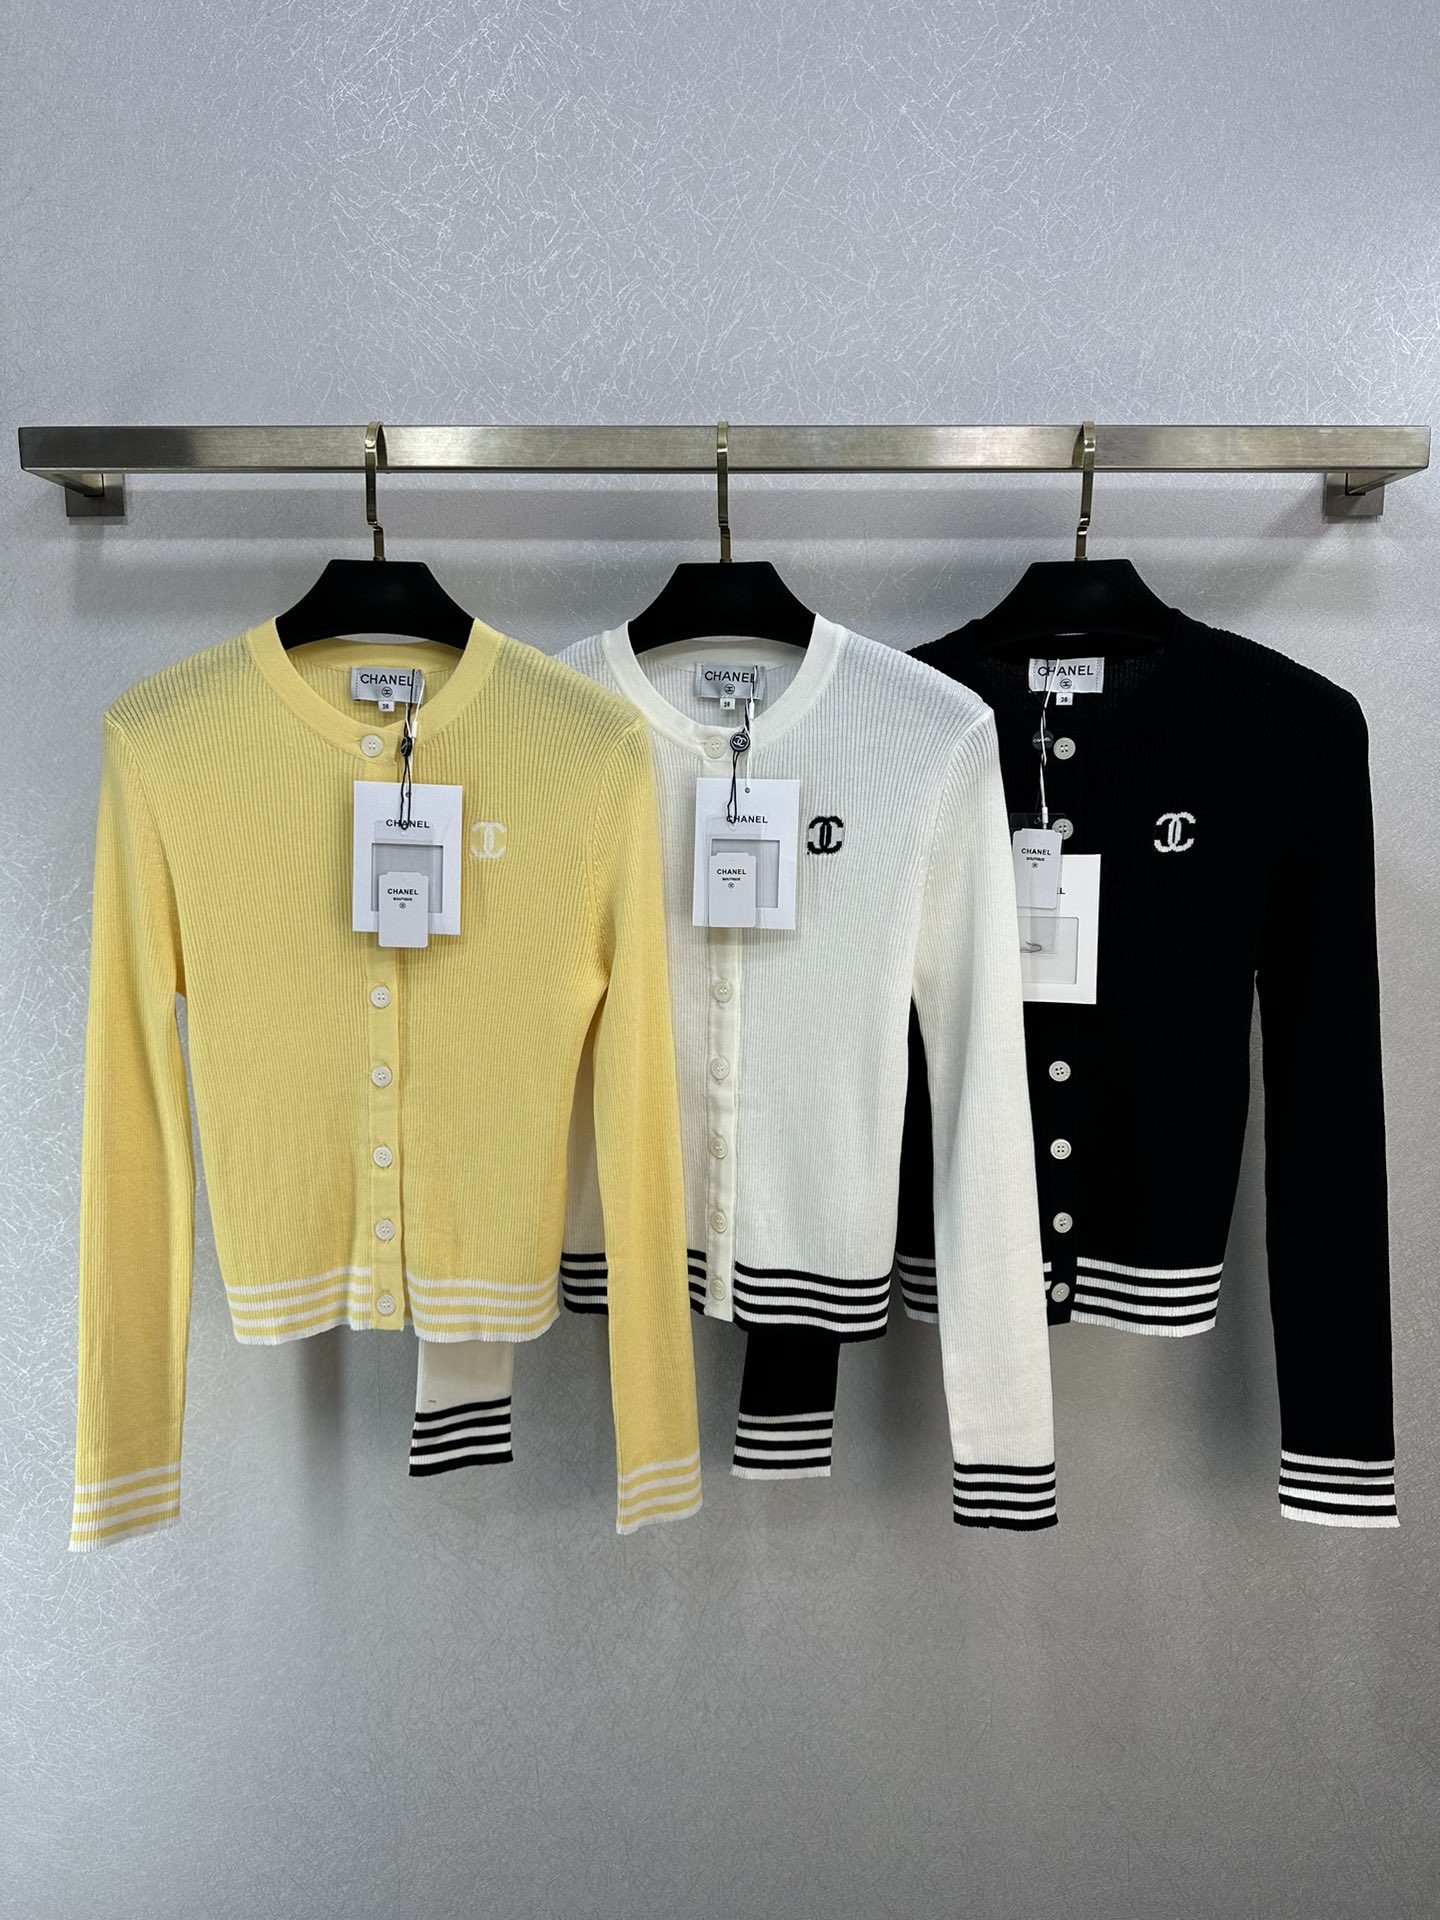 Chanel Clothing Cardigans Knit Sweater for sale online
 White Knitting Casual